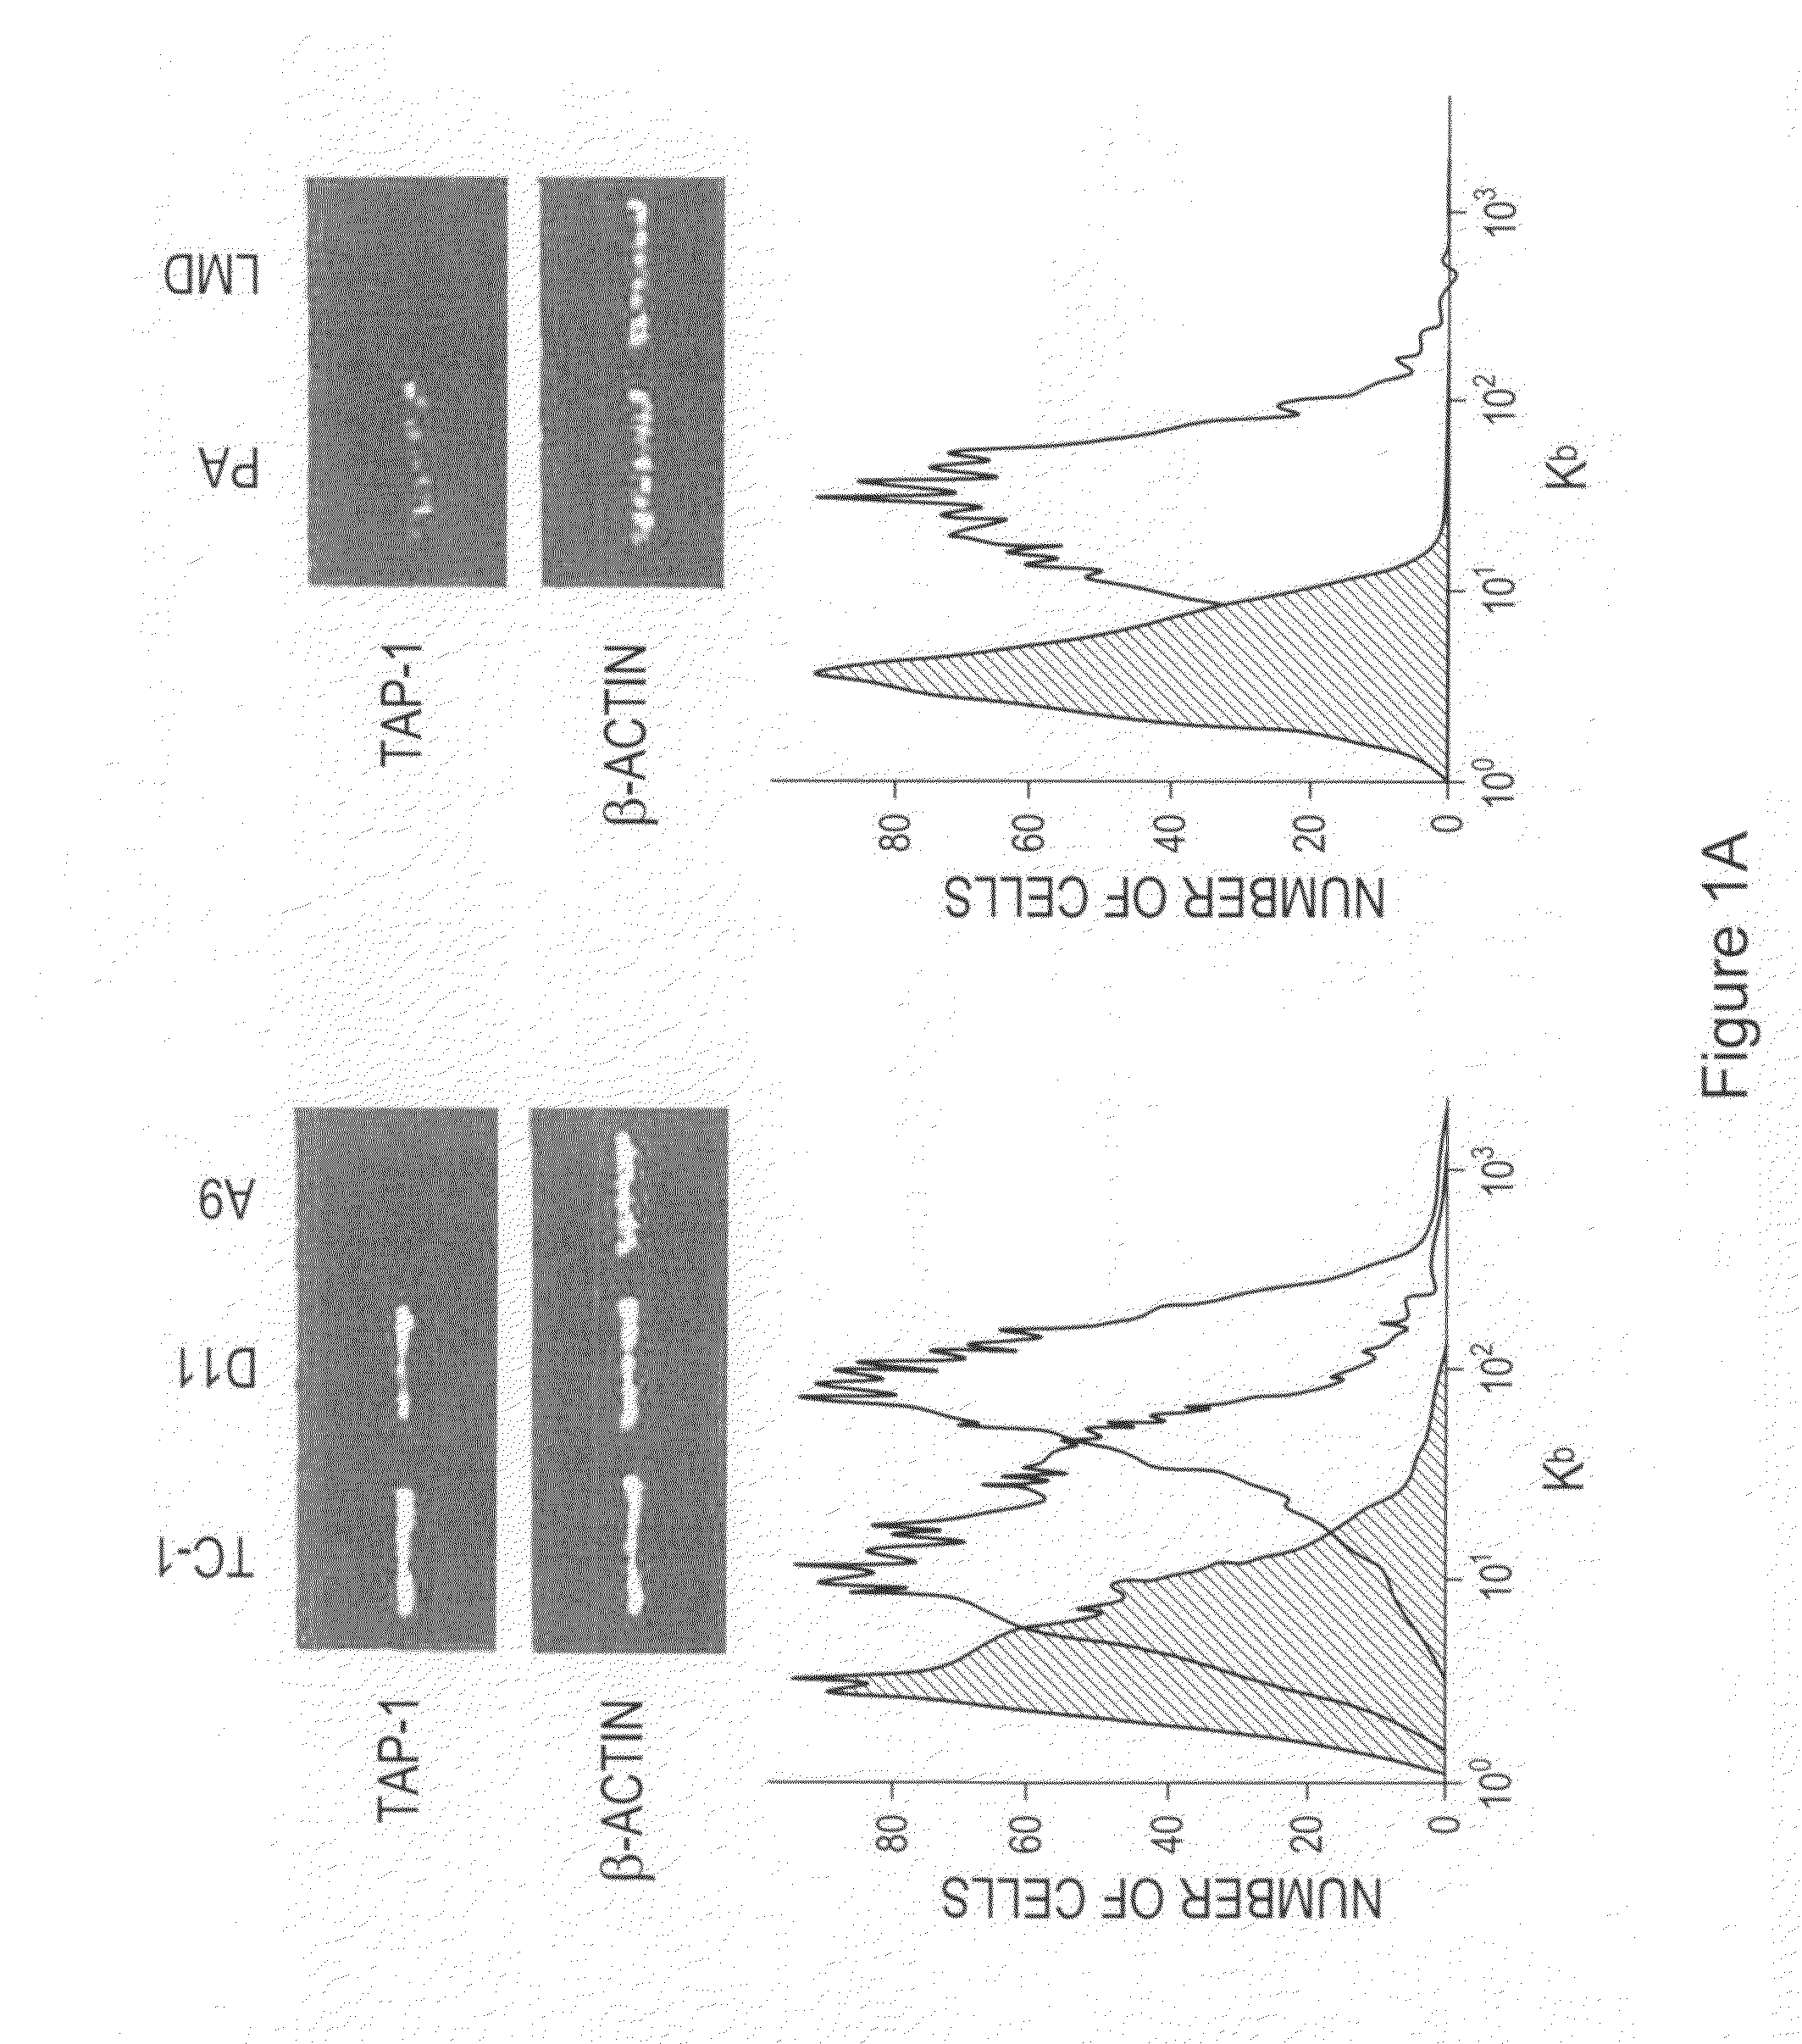 Hat acetylation promoters and uses of compositions thereof in promoting immunogenicity